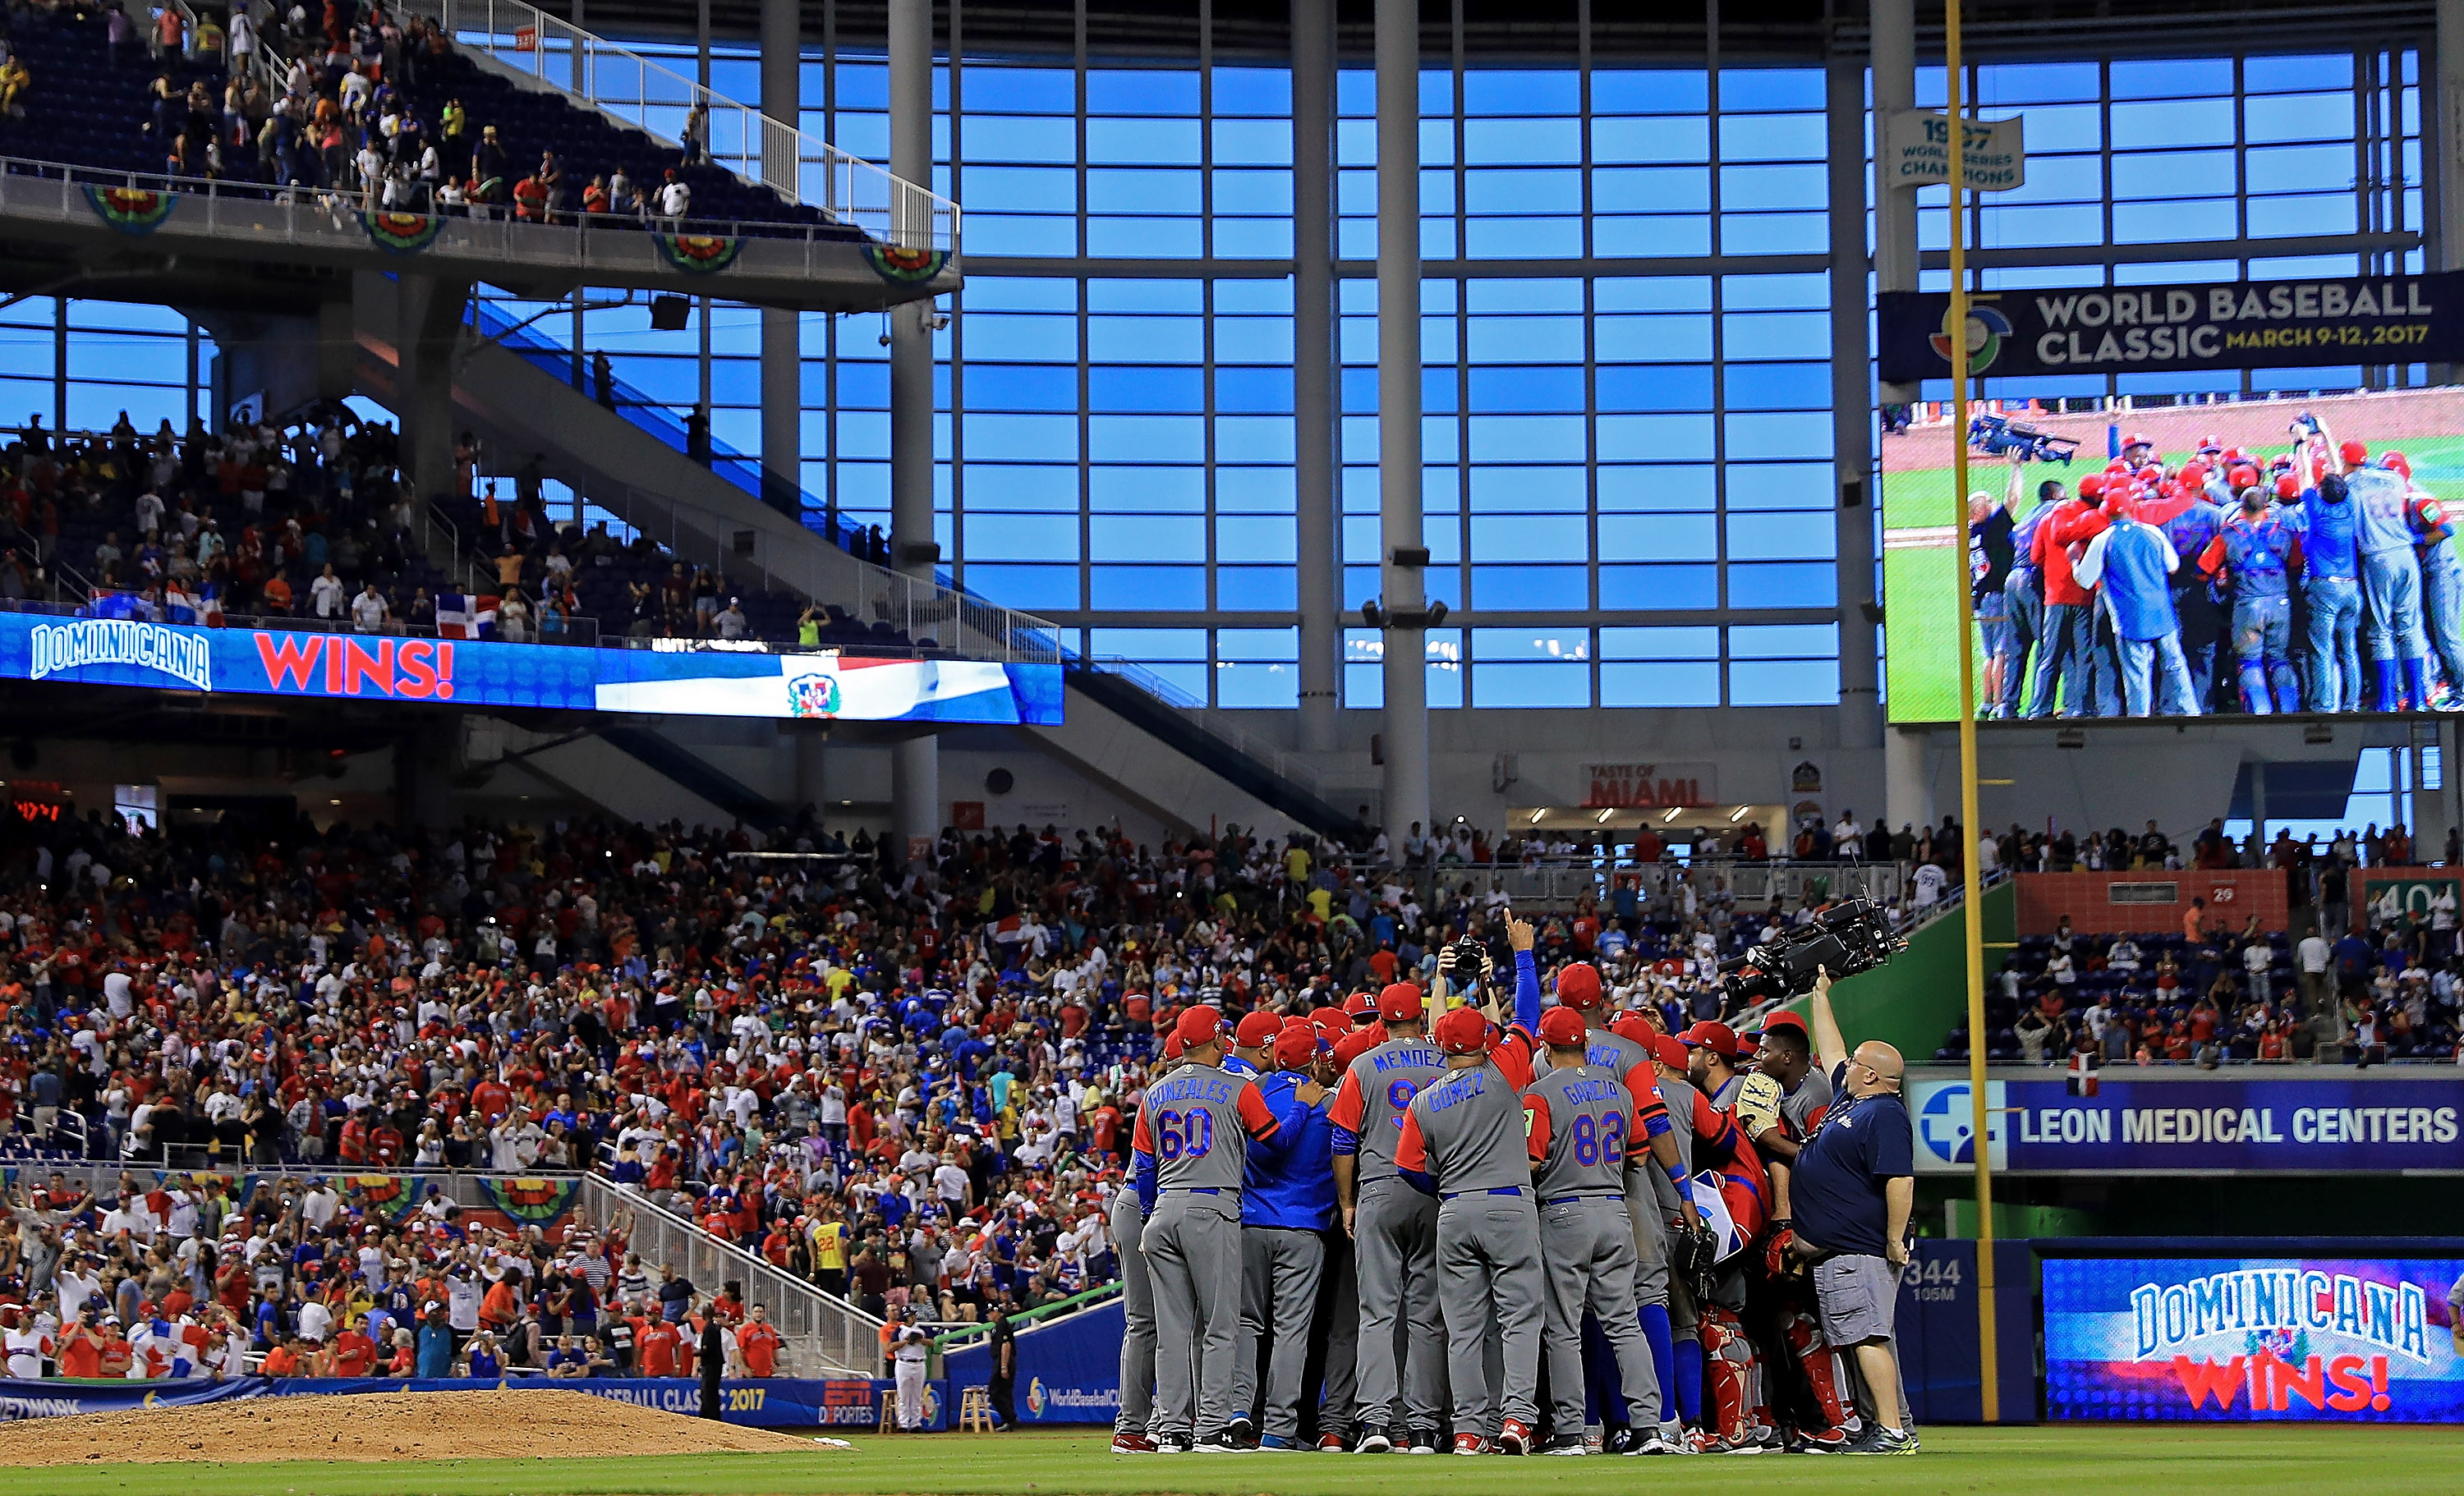 Marlins Park hosts first All-Star Game in 2017